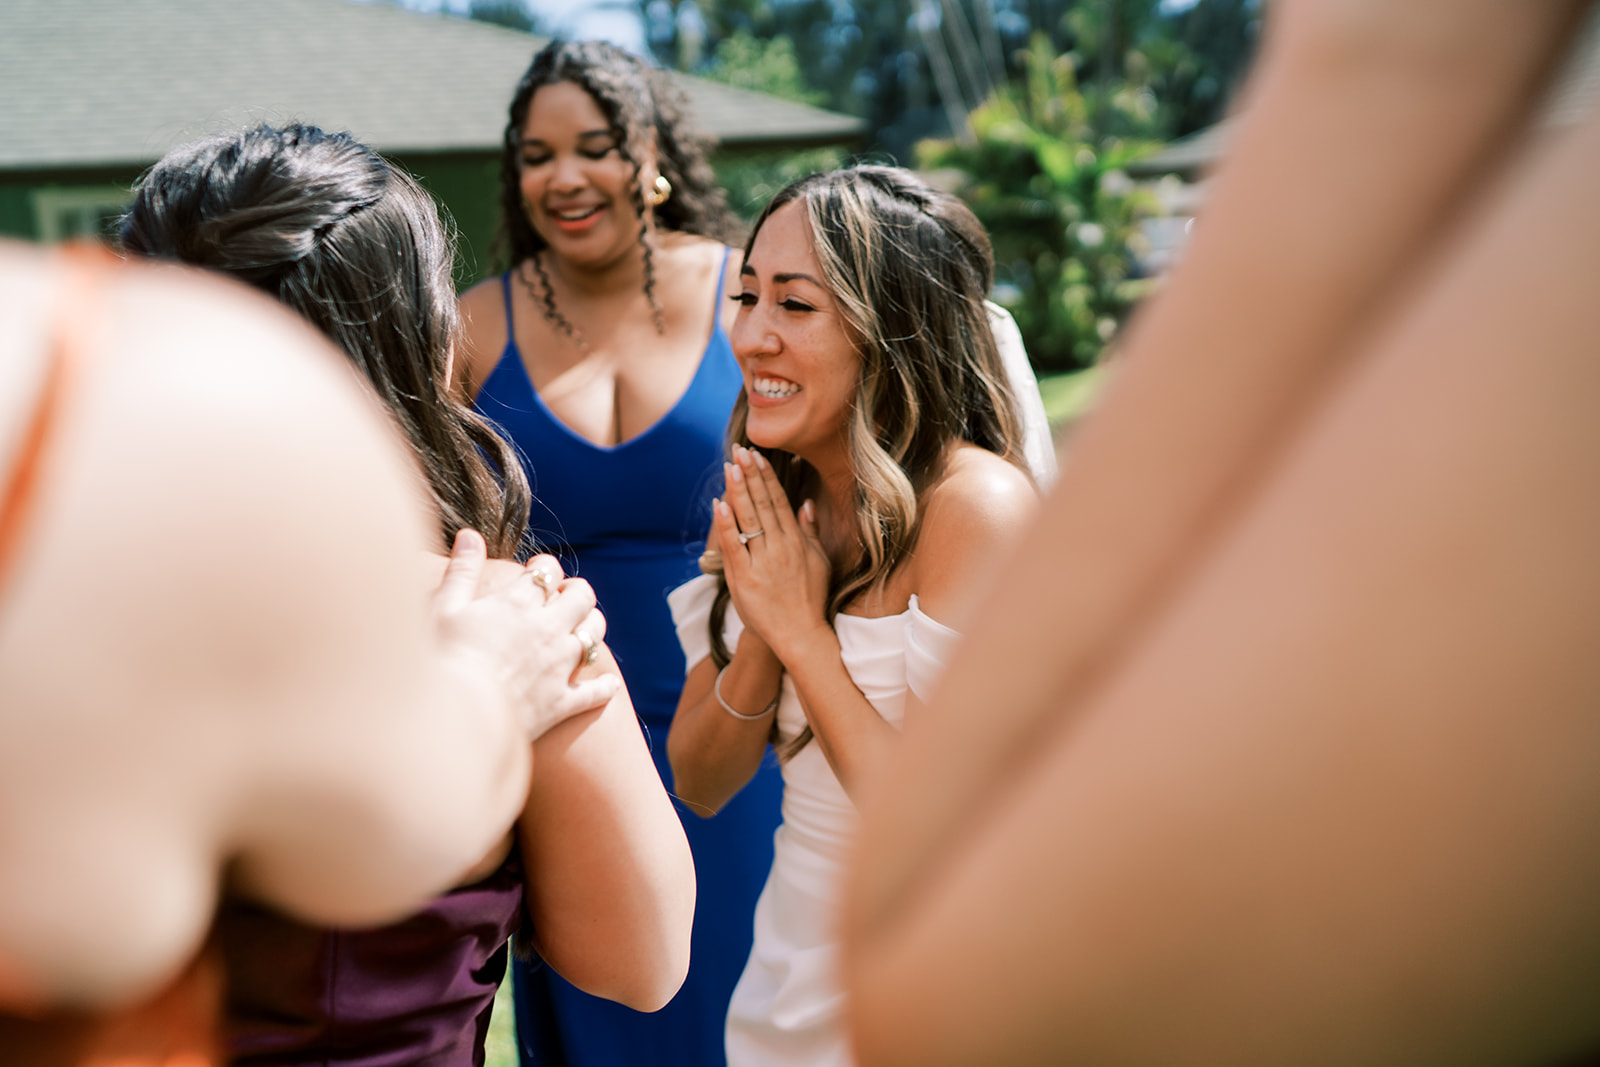 A joyful bride clasping her hands together while interacting with guests, with a bridesmaid smiling in the background.